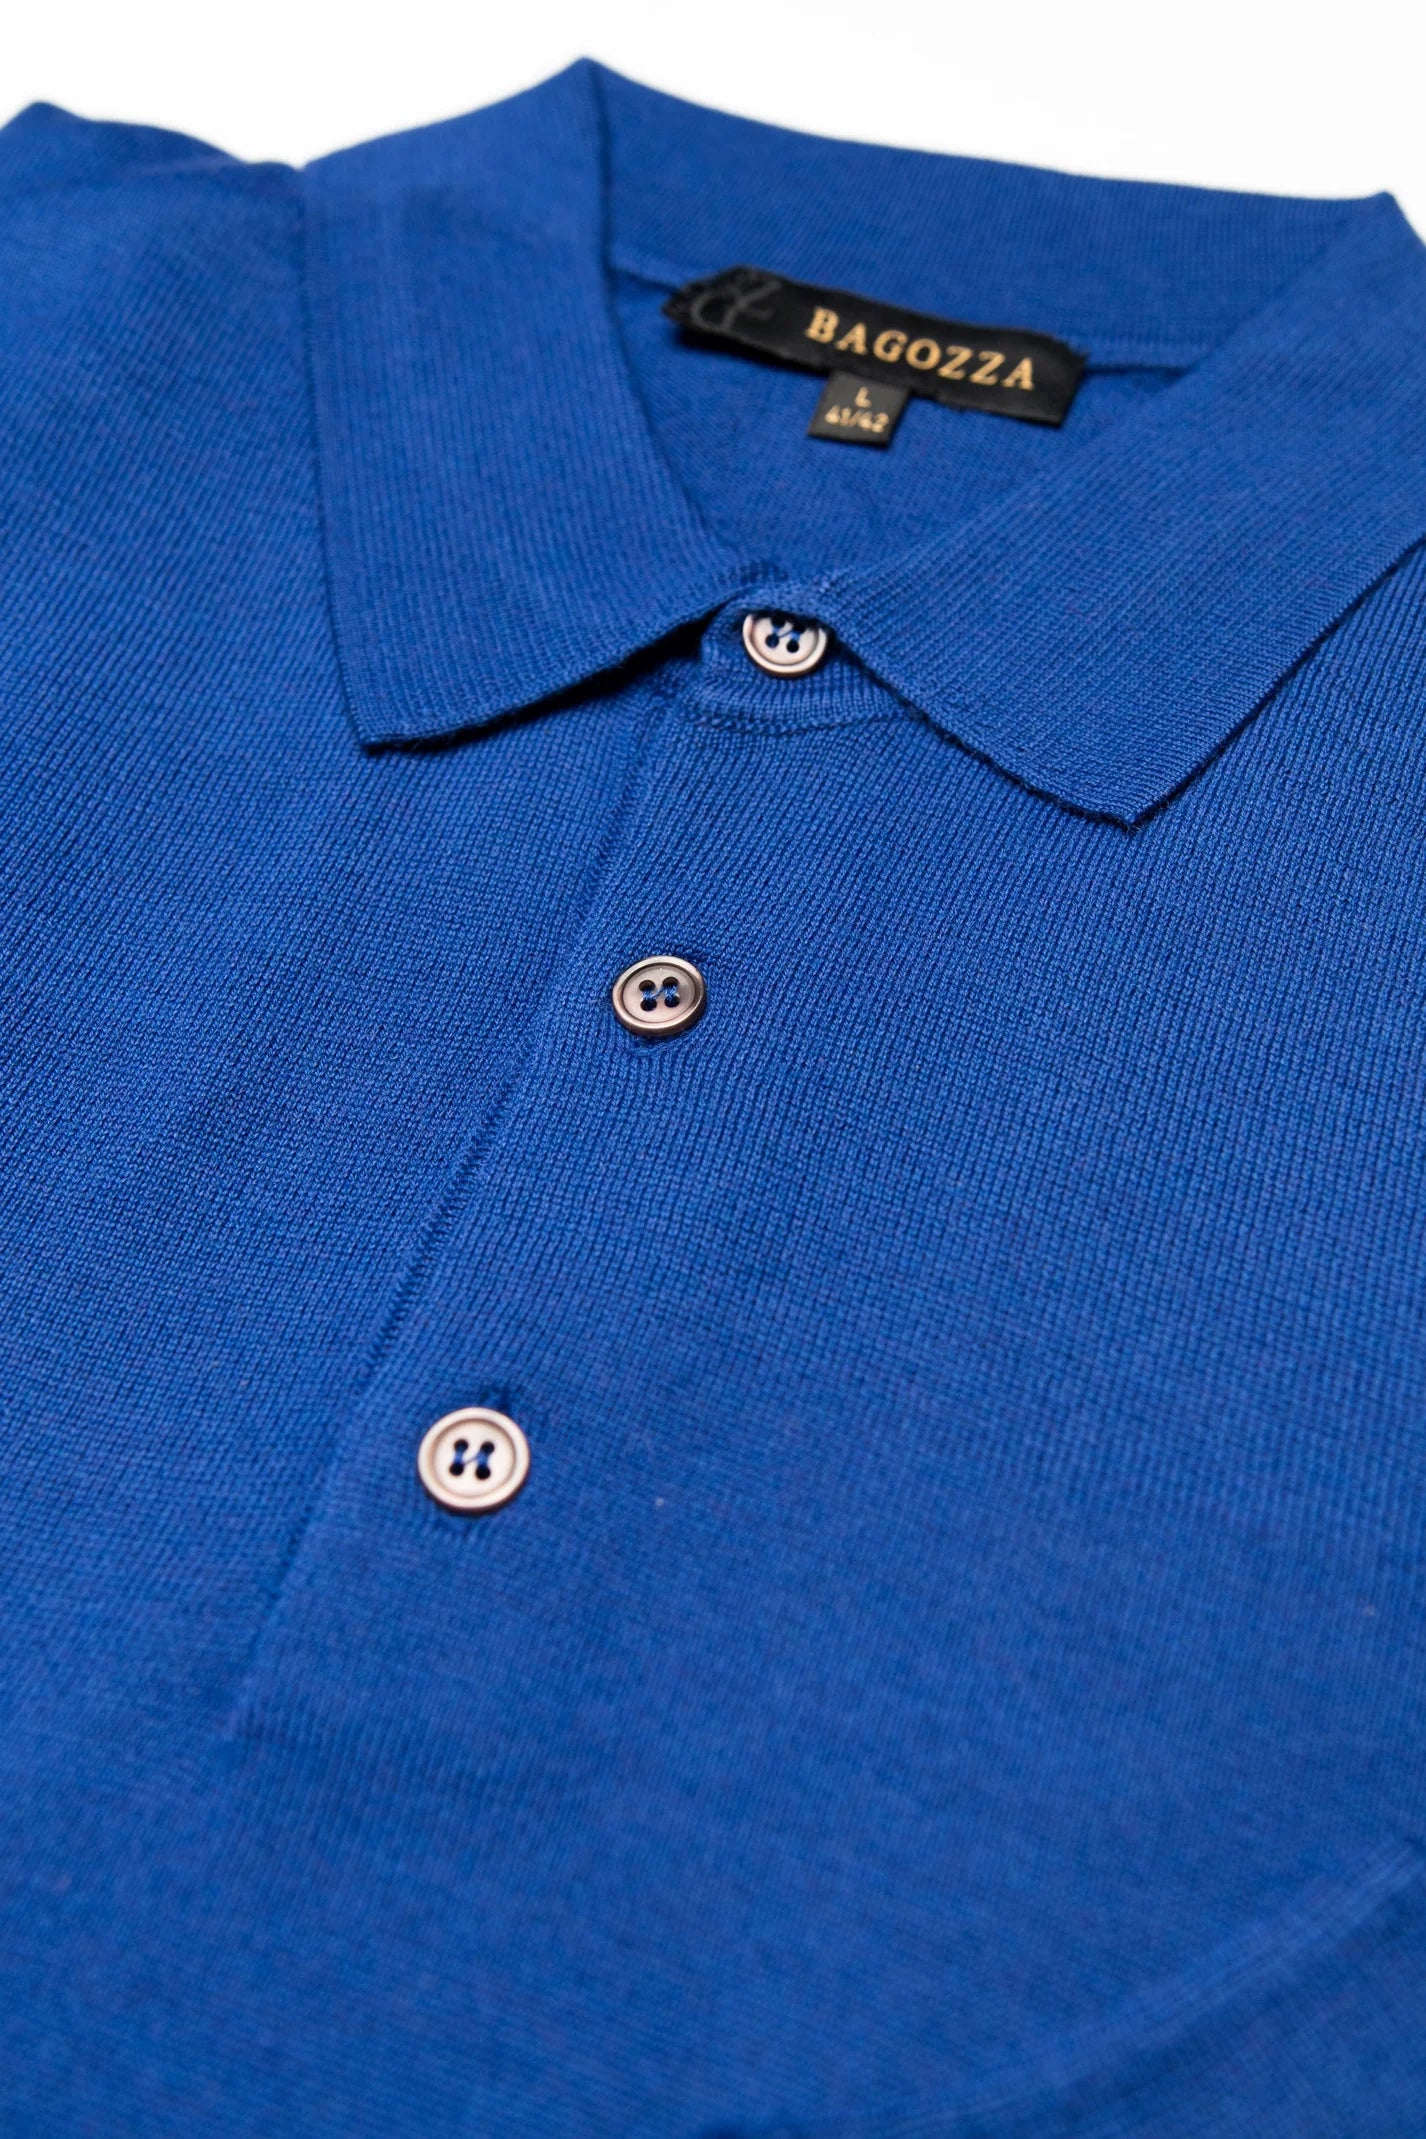 Men's Bagozza merino wool blend long-sleeve golf shirt with ribbing in blue (8370) - available in-store, 337 Monty Naicker Street, Durban CBD or online at Omar's Tailors & Outfitters online store.   A men's fashion curation for South African men - established in 1911.